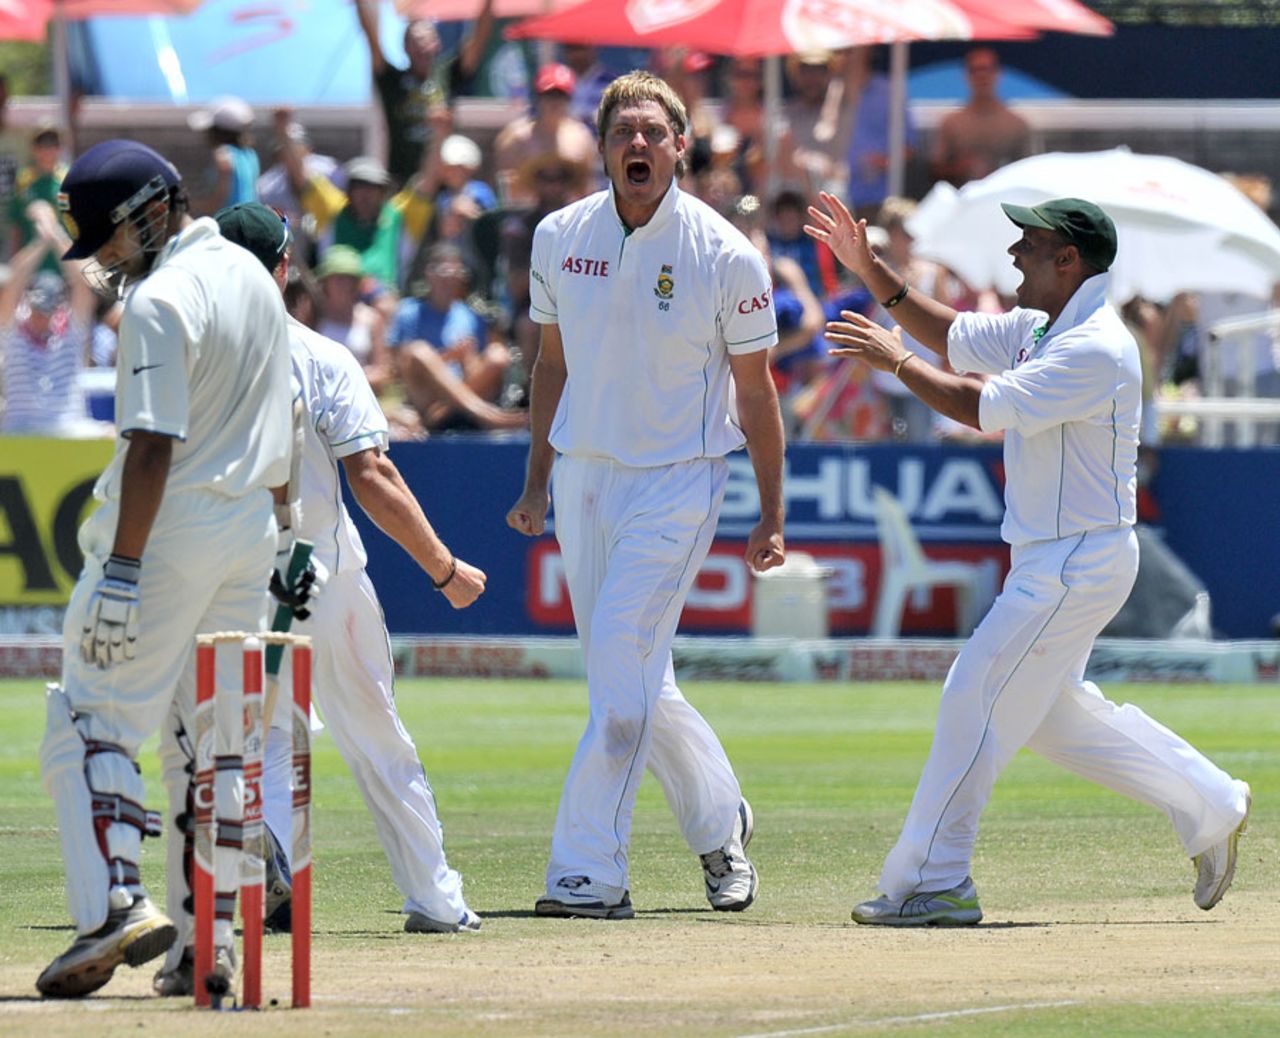 Paul Harris is thrilled after dismissing Gautam Gambhir, South Africa v India, 3rd Test, Cape Town, 3rd day, January 4, 2011